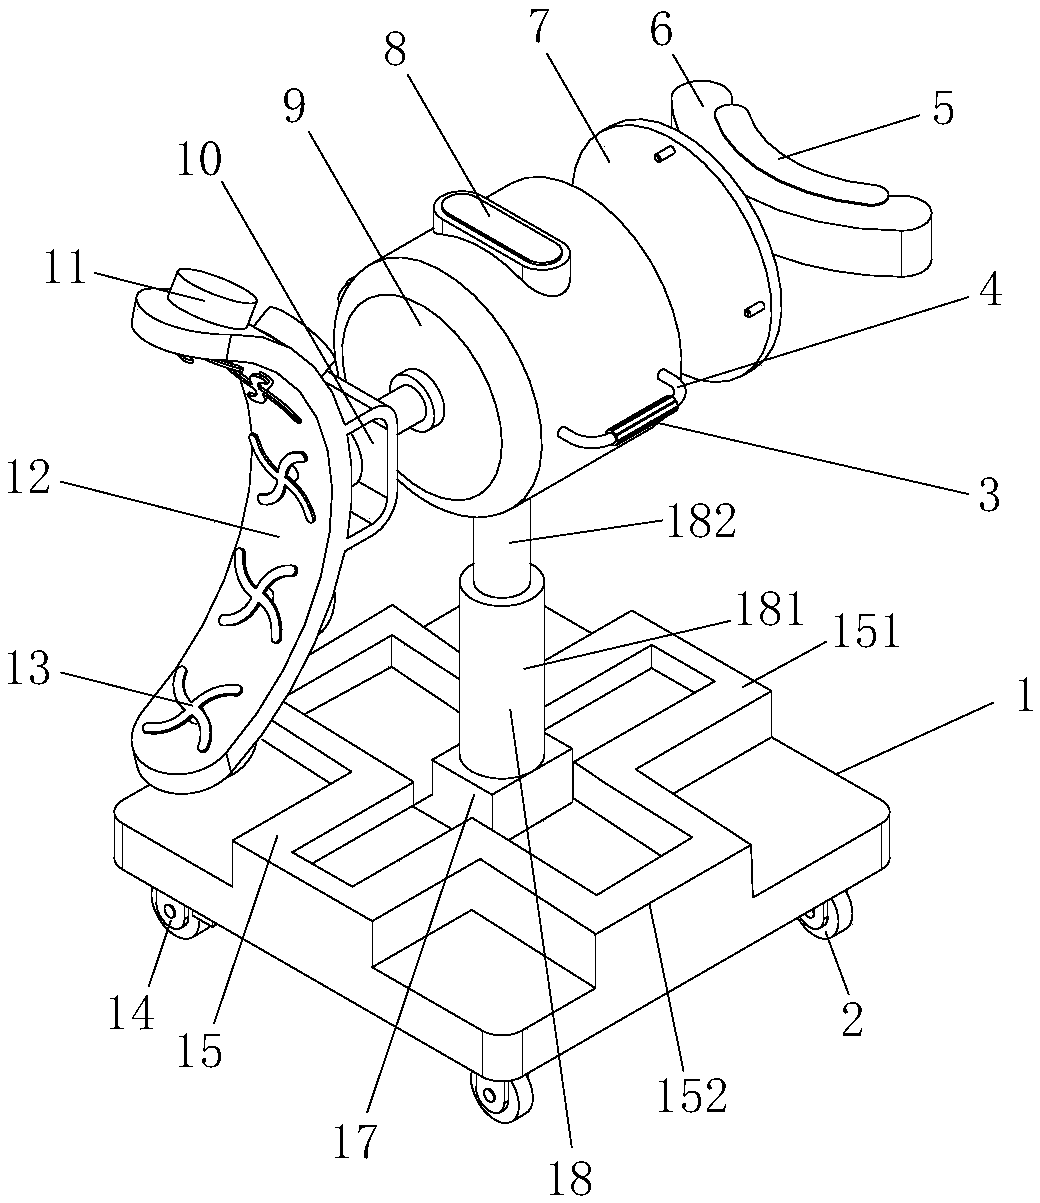 Control method of trimmer